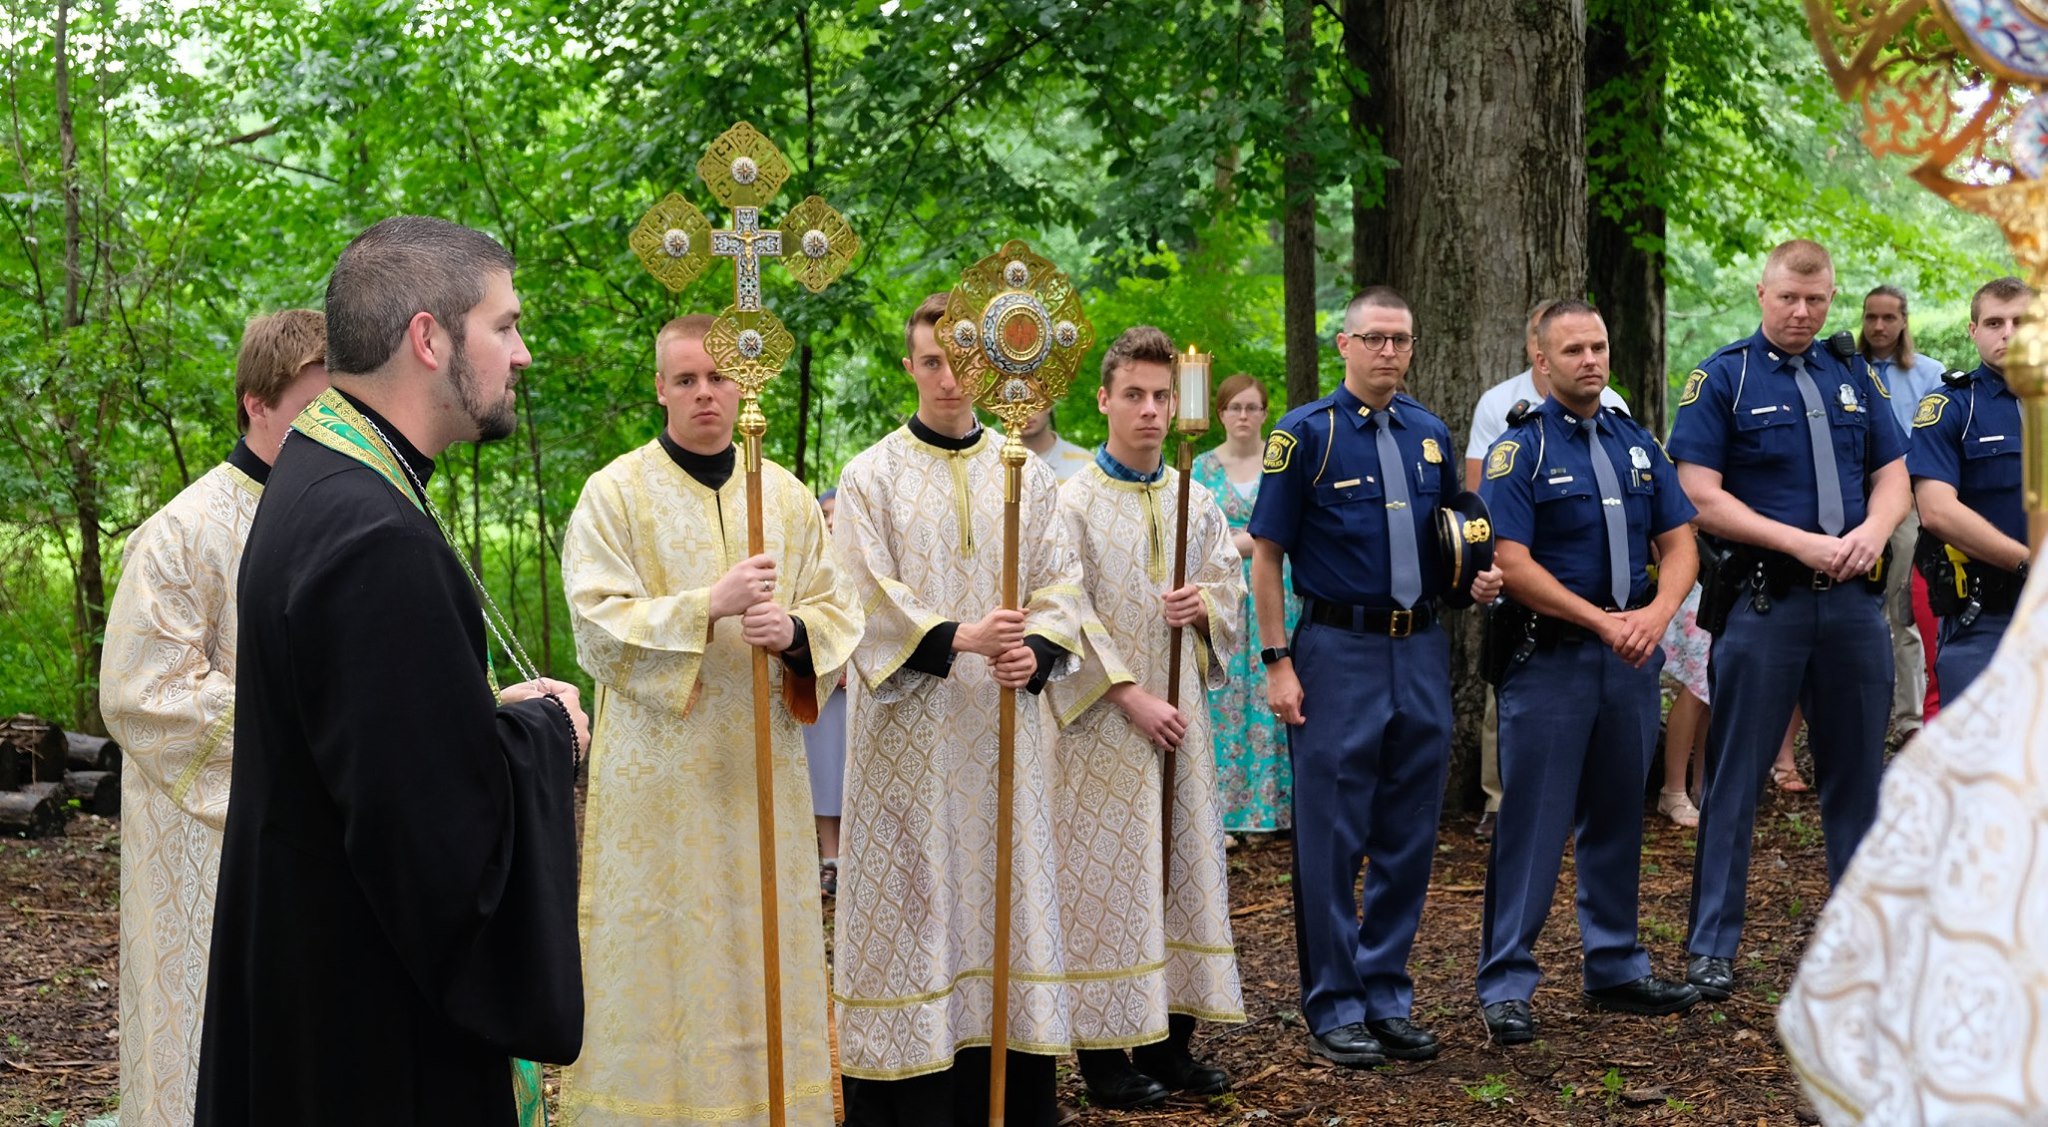  altar servers lined up next to state troopers with priest speaking  